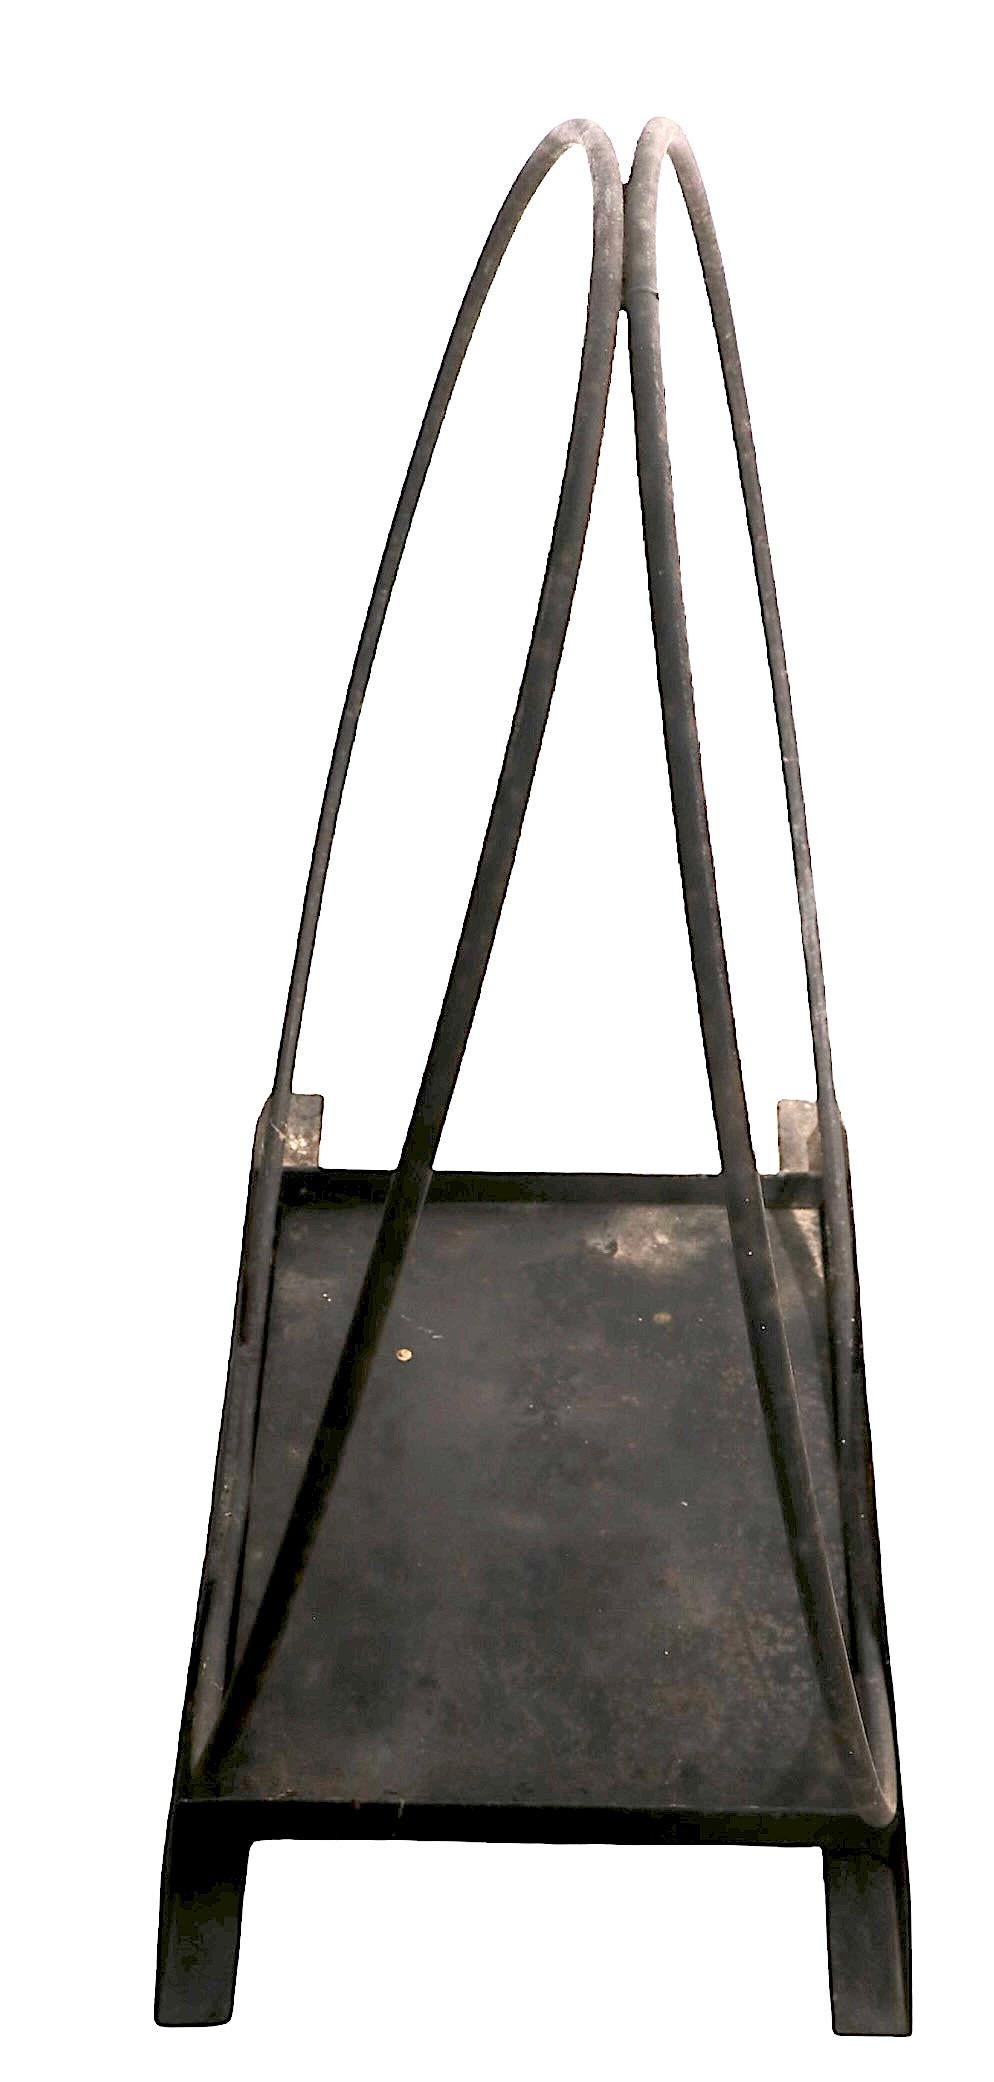 Well crafted wrought iron mid century log holder with unusual steel tray base. Nice medium scale dimensions make this log holder perfect for either indoor or outdoor use.